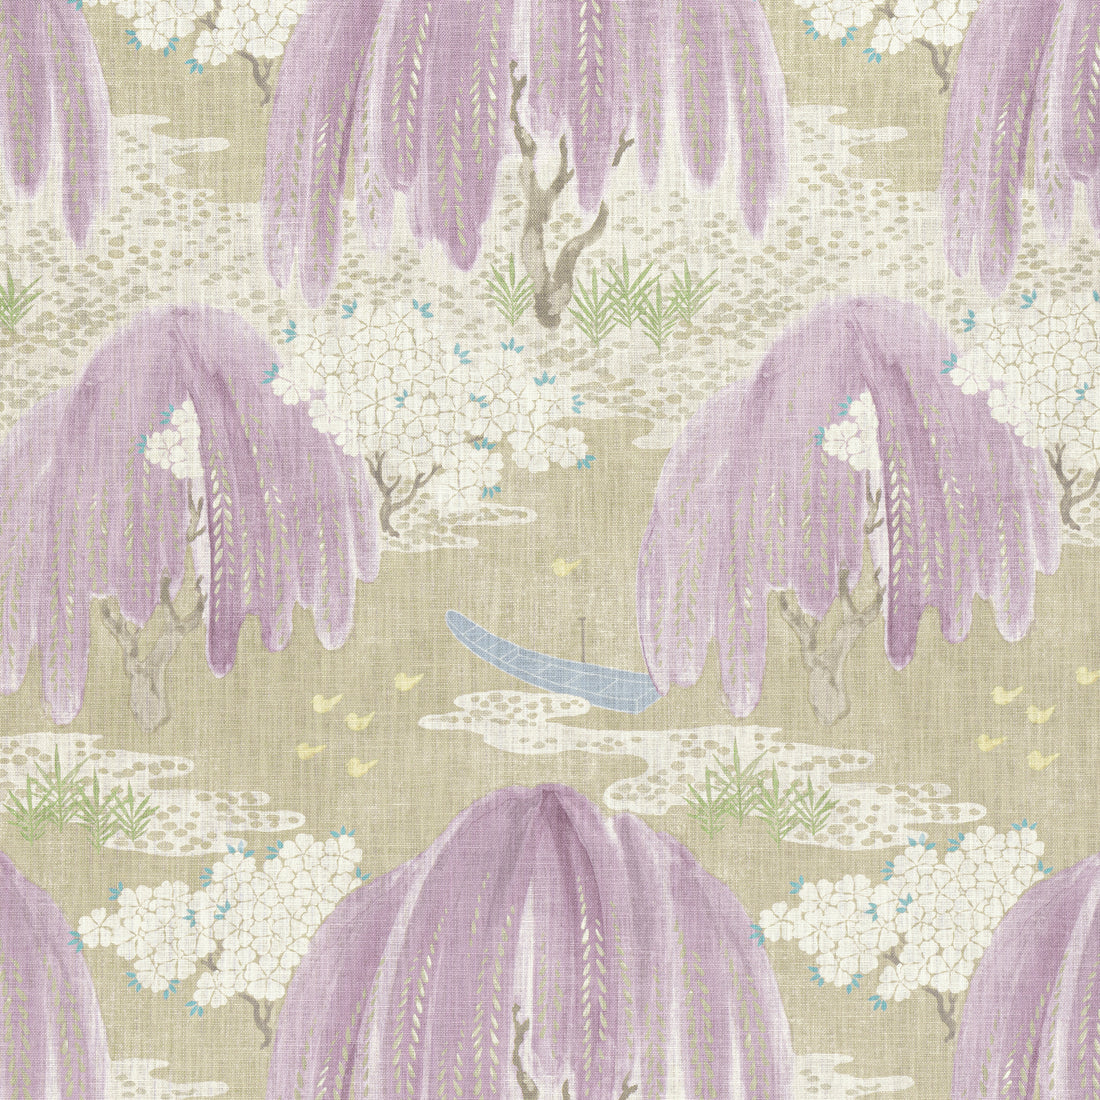 Willow Tree fabric in lavender color - pattern number AF23107 - by Anna French in the Willow Tree collection